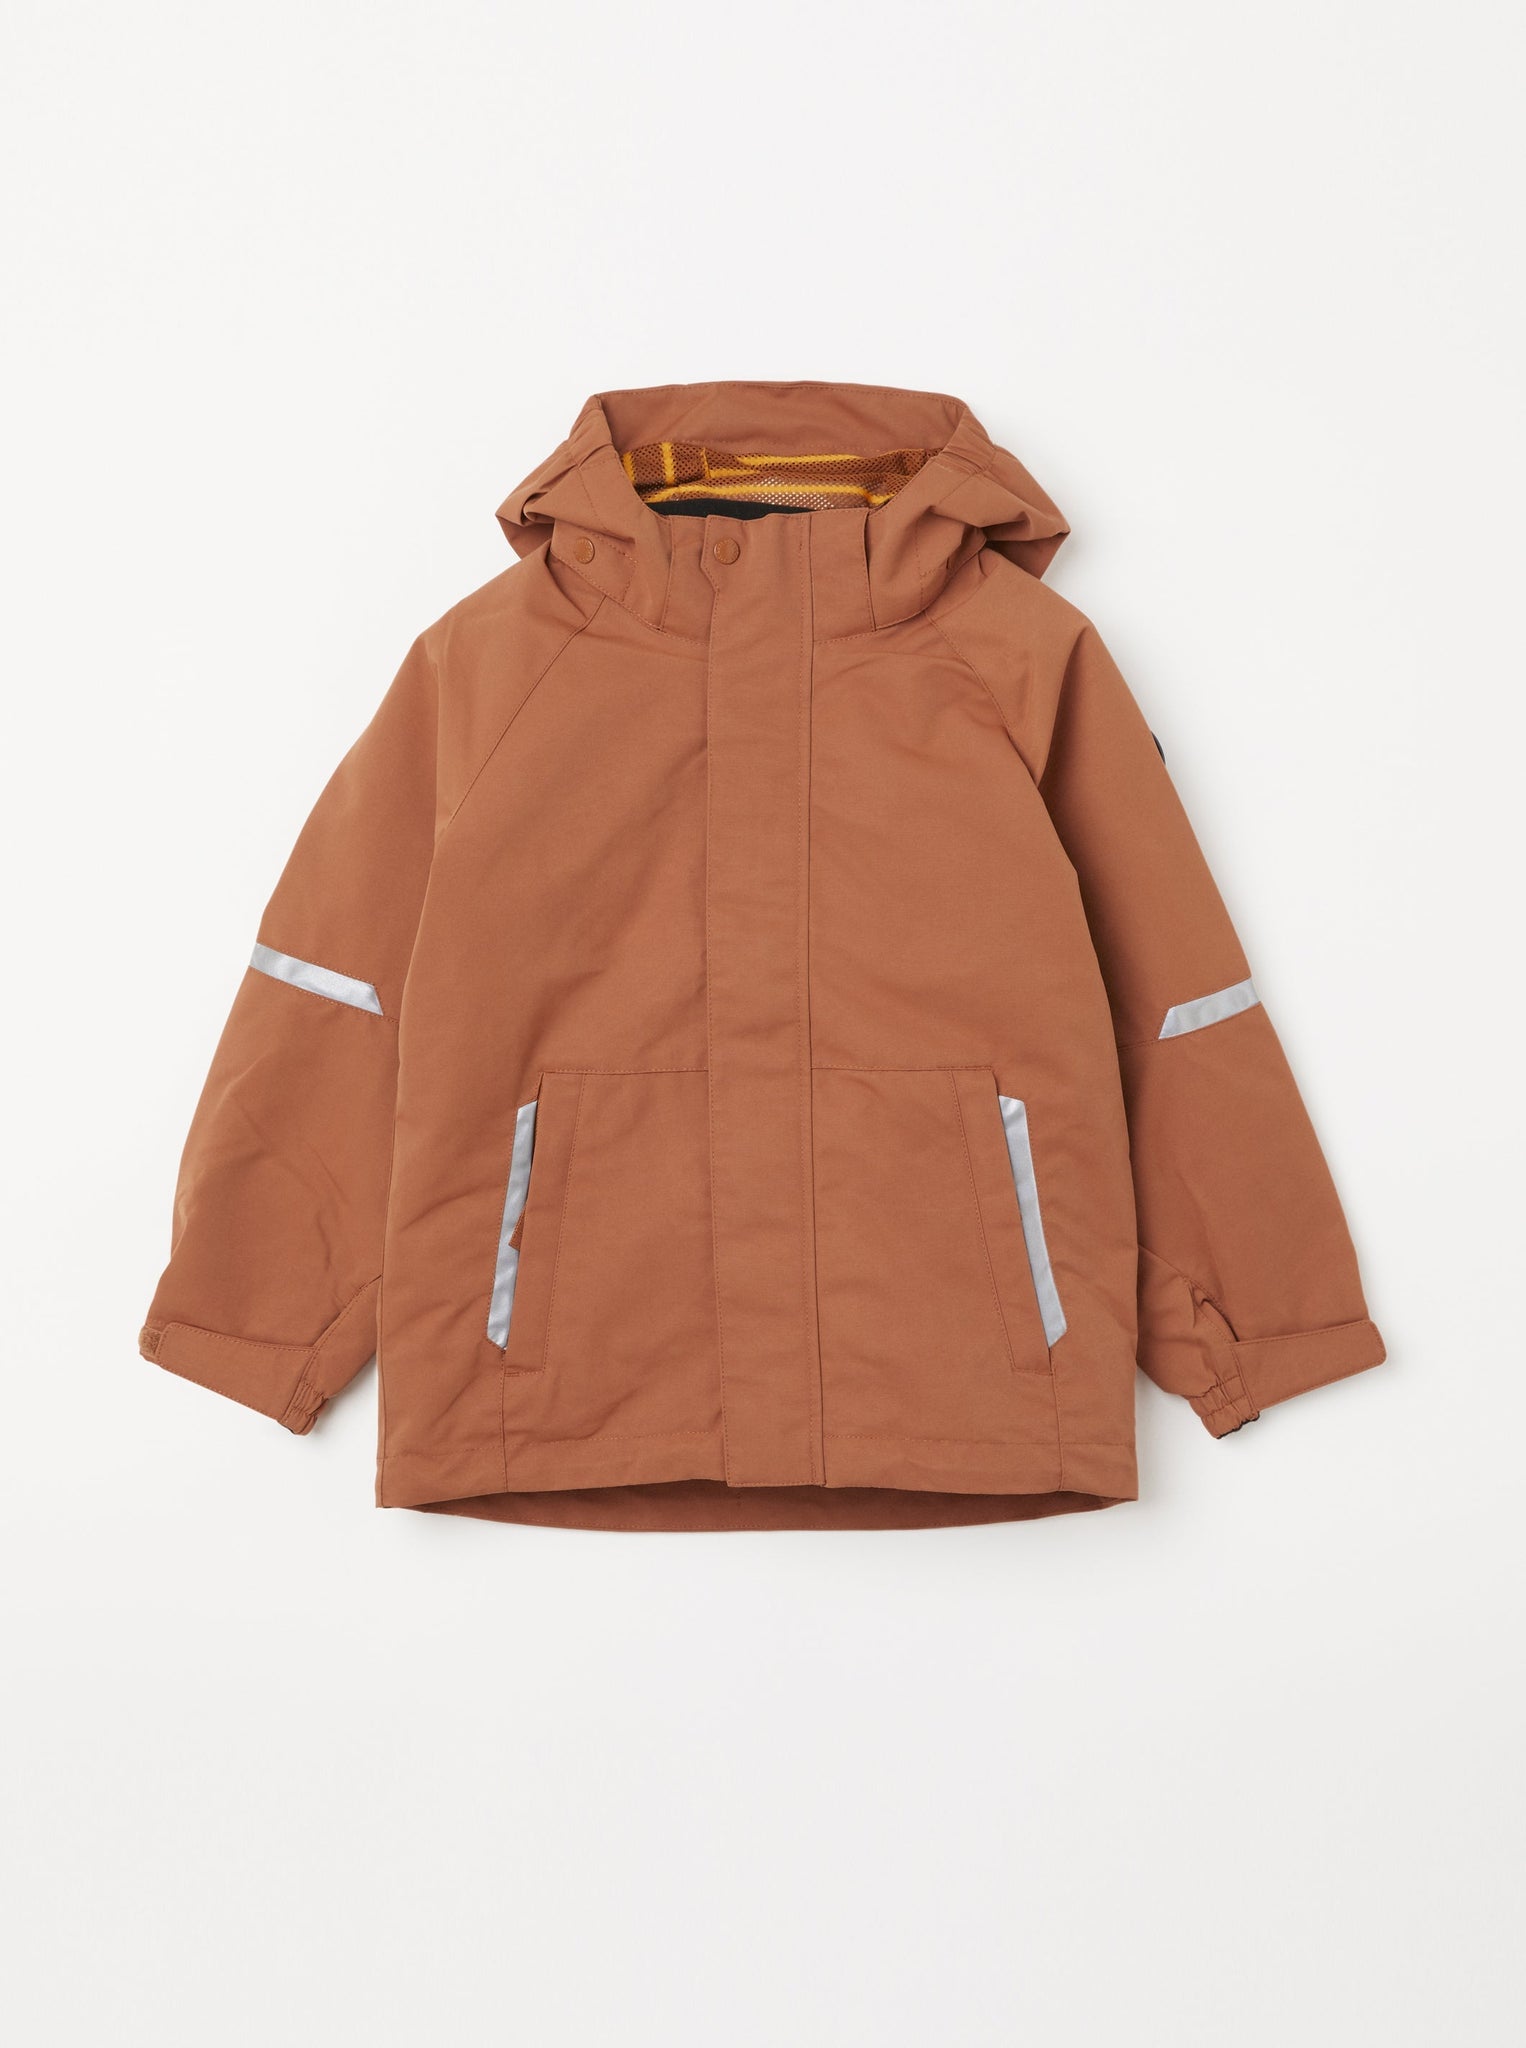 Orange Kids Waterproof Shell Jacket from the Polarn O. Pyret kidswear collection. Ethically produced kids outerwear.